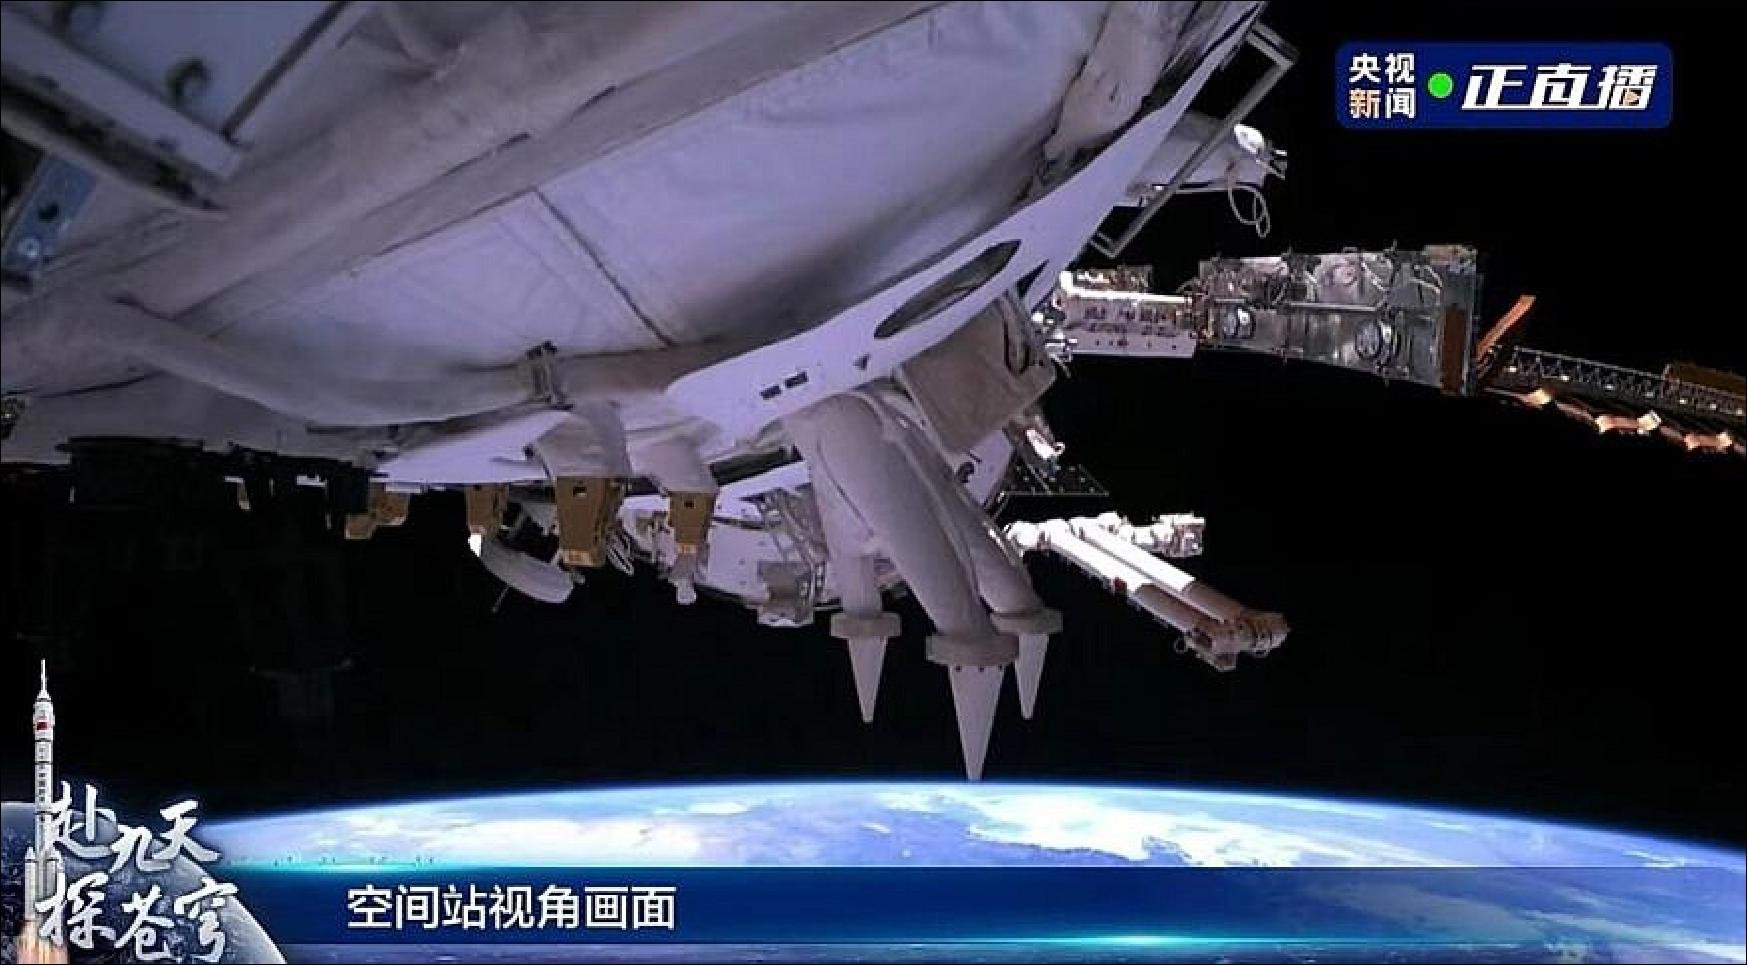 Figure 17: A view from the Tianhe core module after the docking of the Shenzhou-14 crewed spacecraft (image credit: CCTV/framegrab)